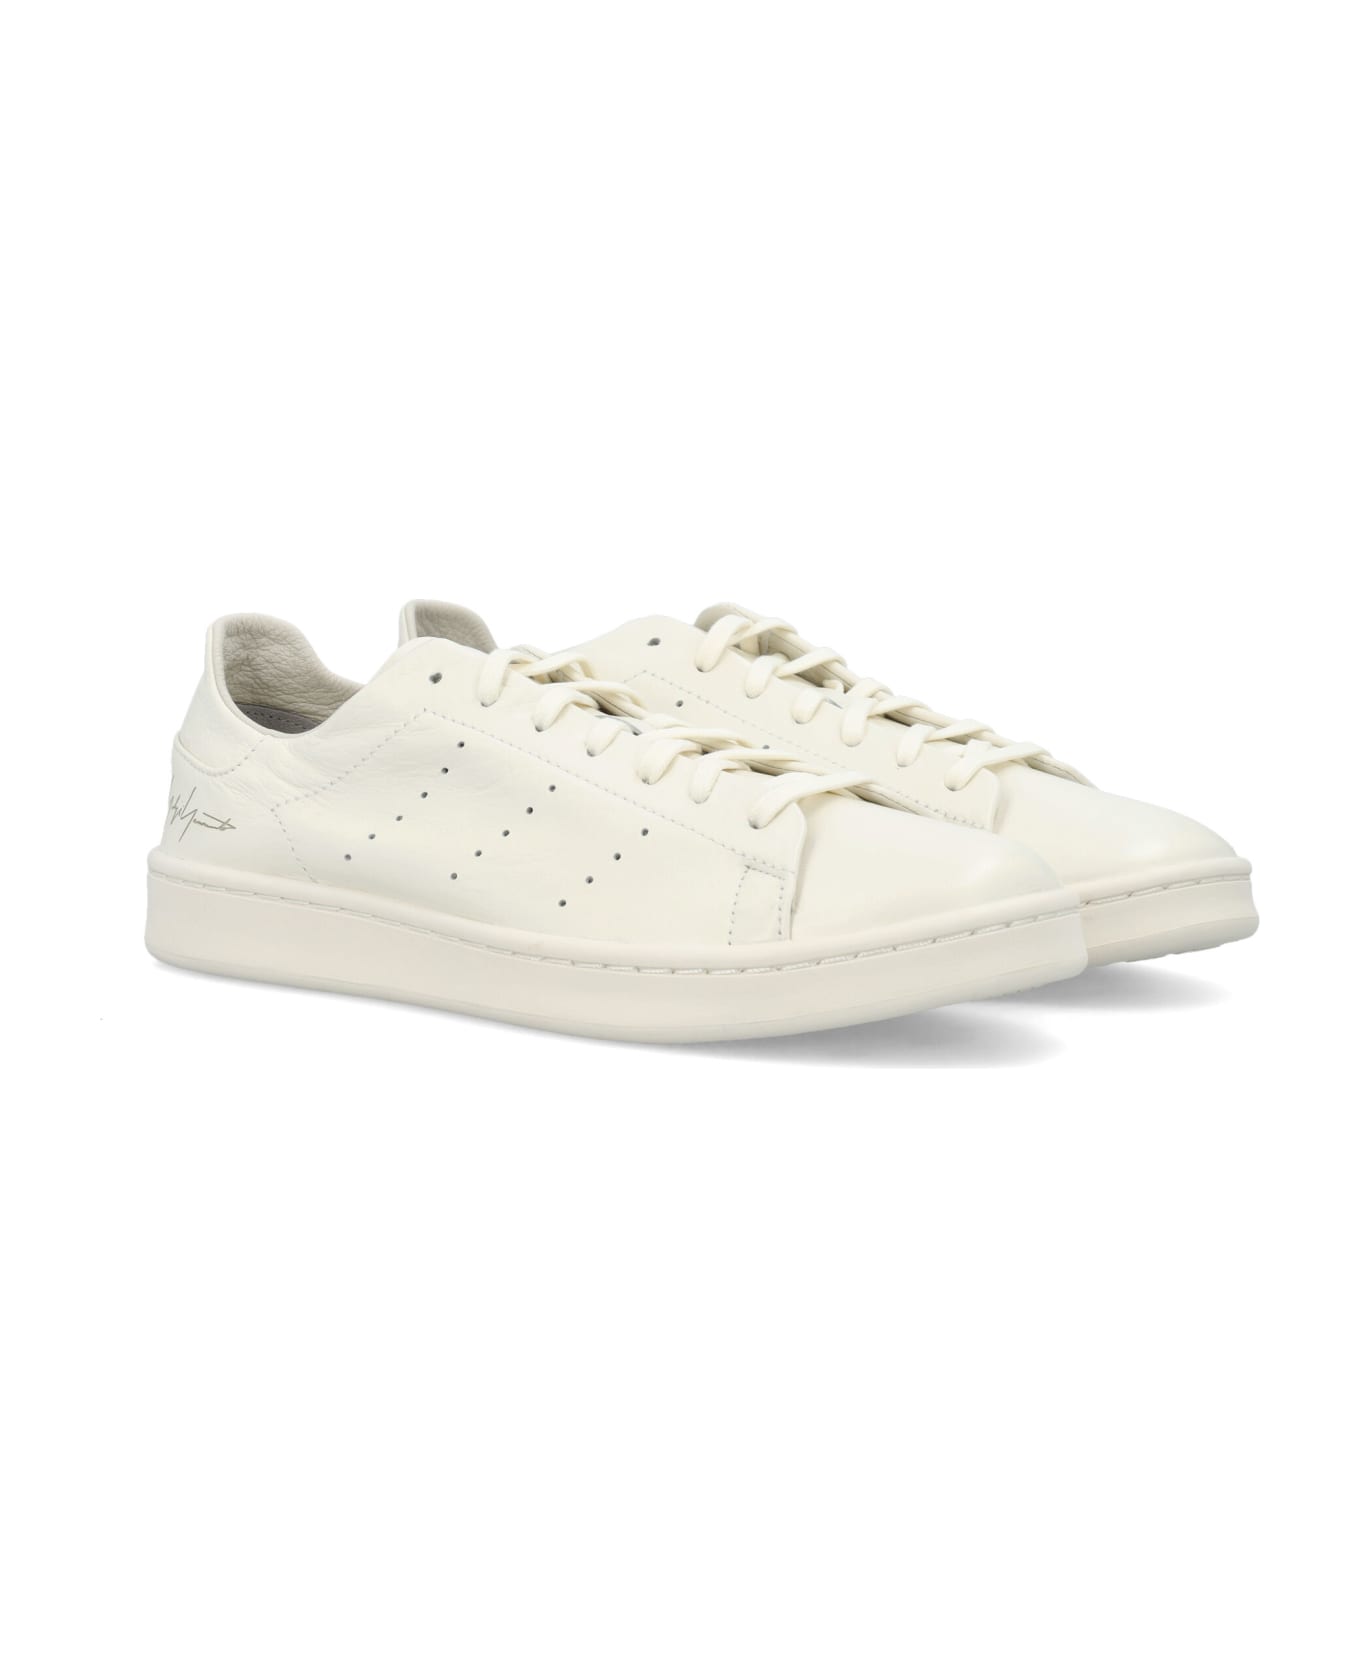 Y-3 Stan Smith Sneakers - WHITE スニーカー